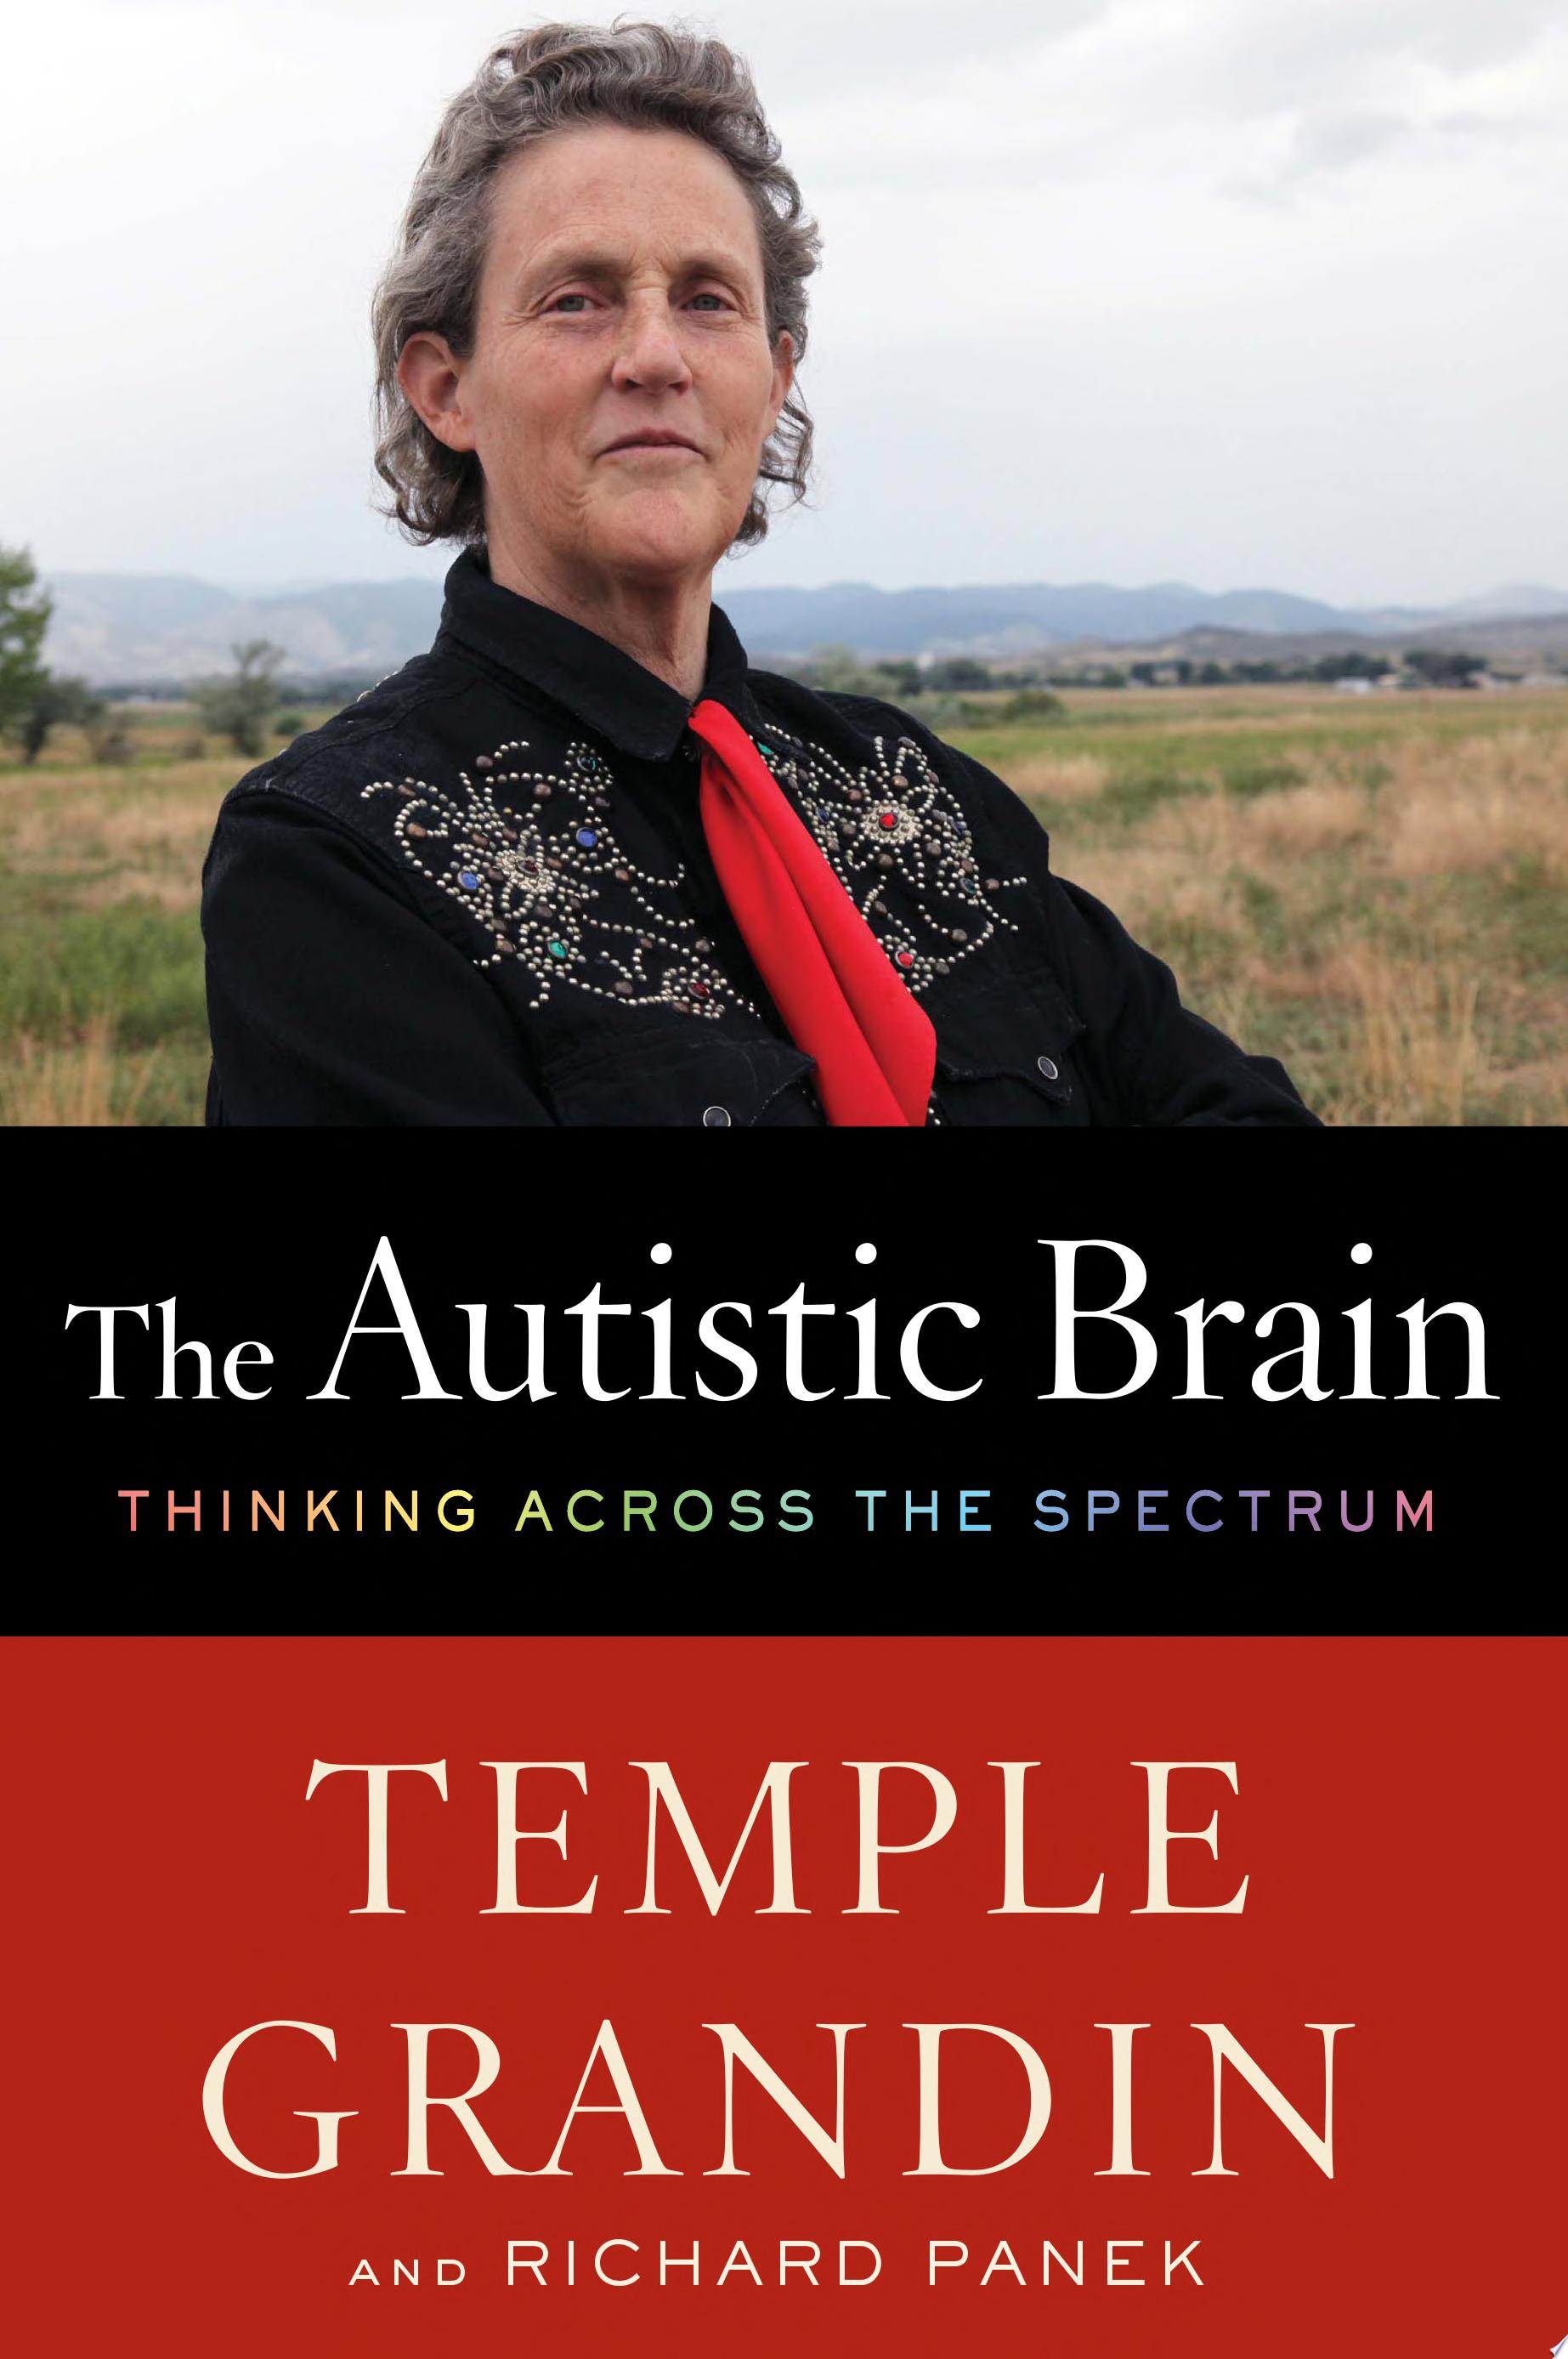 Image for "The Autistic Brain"